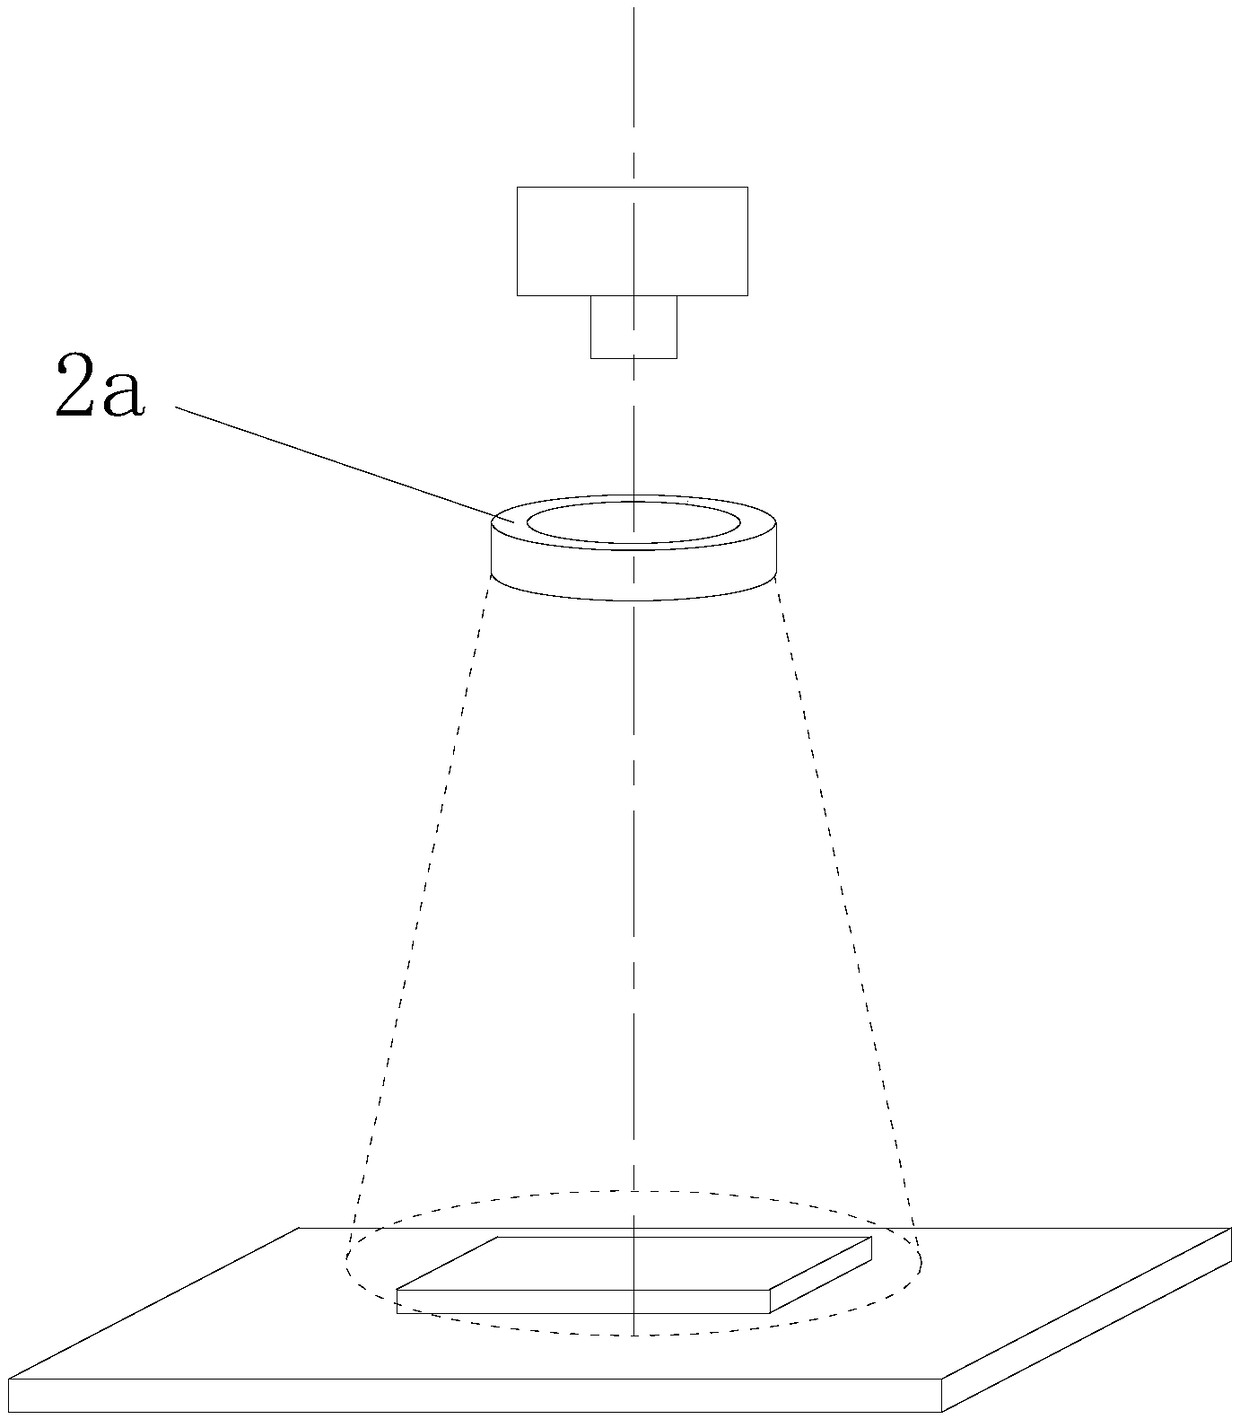 Glass surface defect detection system and method